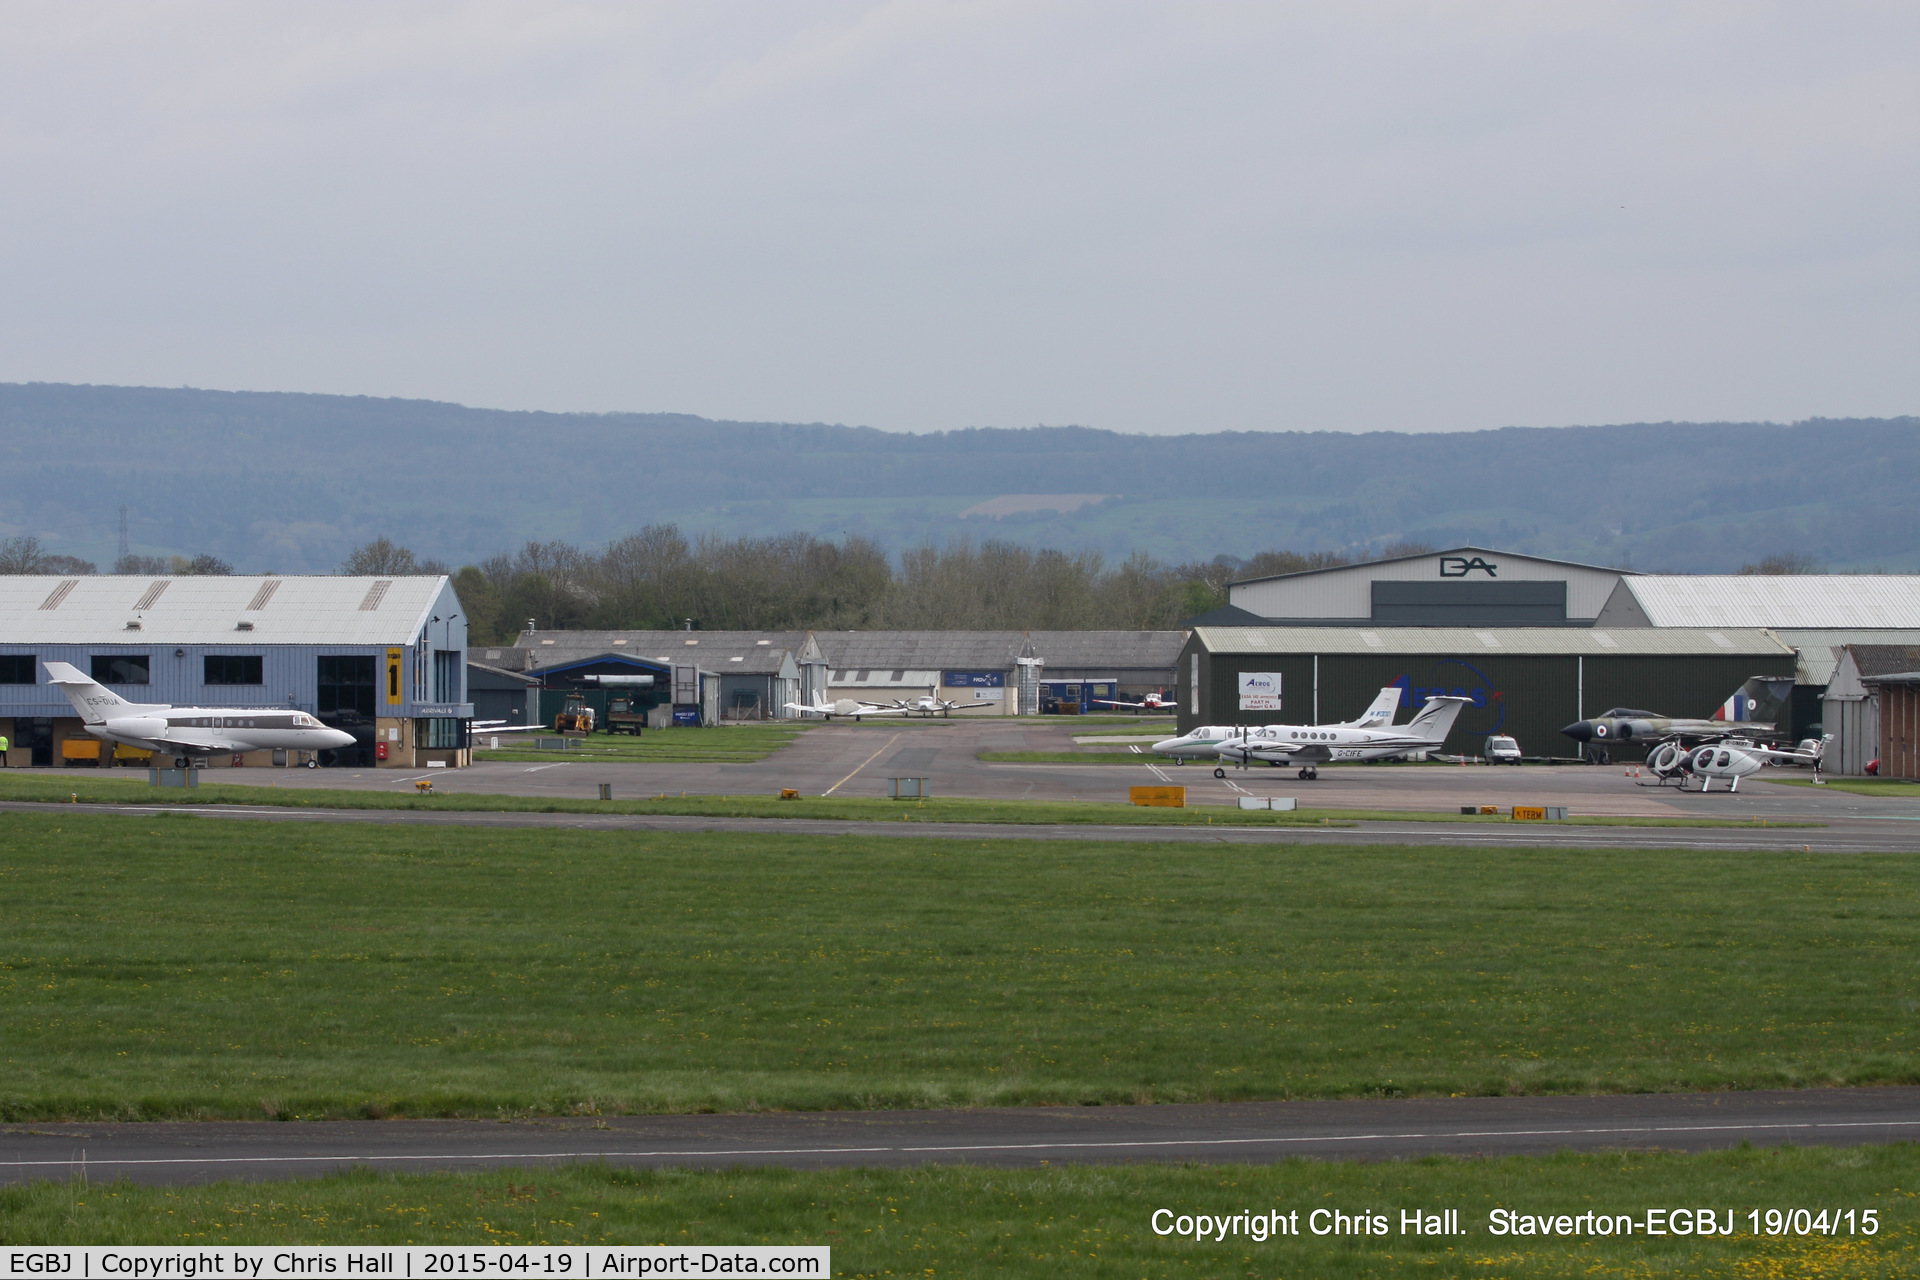 Gloucestershire Airport, Staverton, England United Kingdom (EGBJ) - view across the main apron and hangars at Staverton